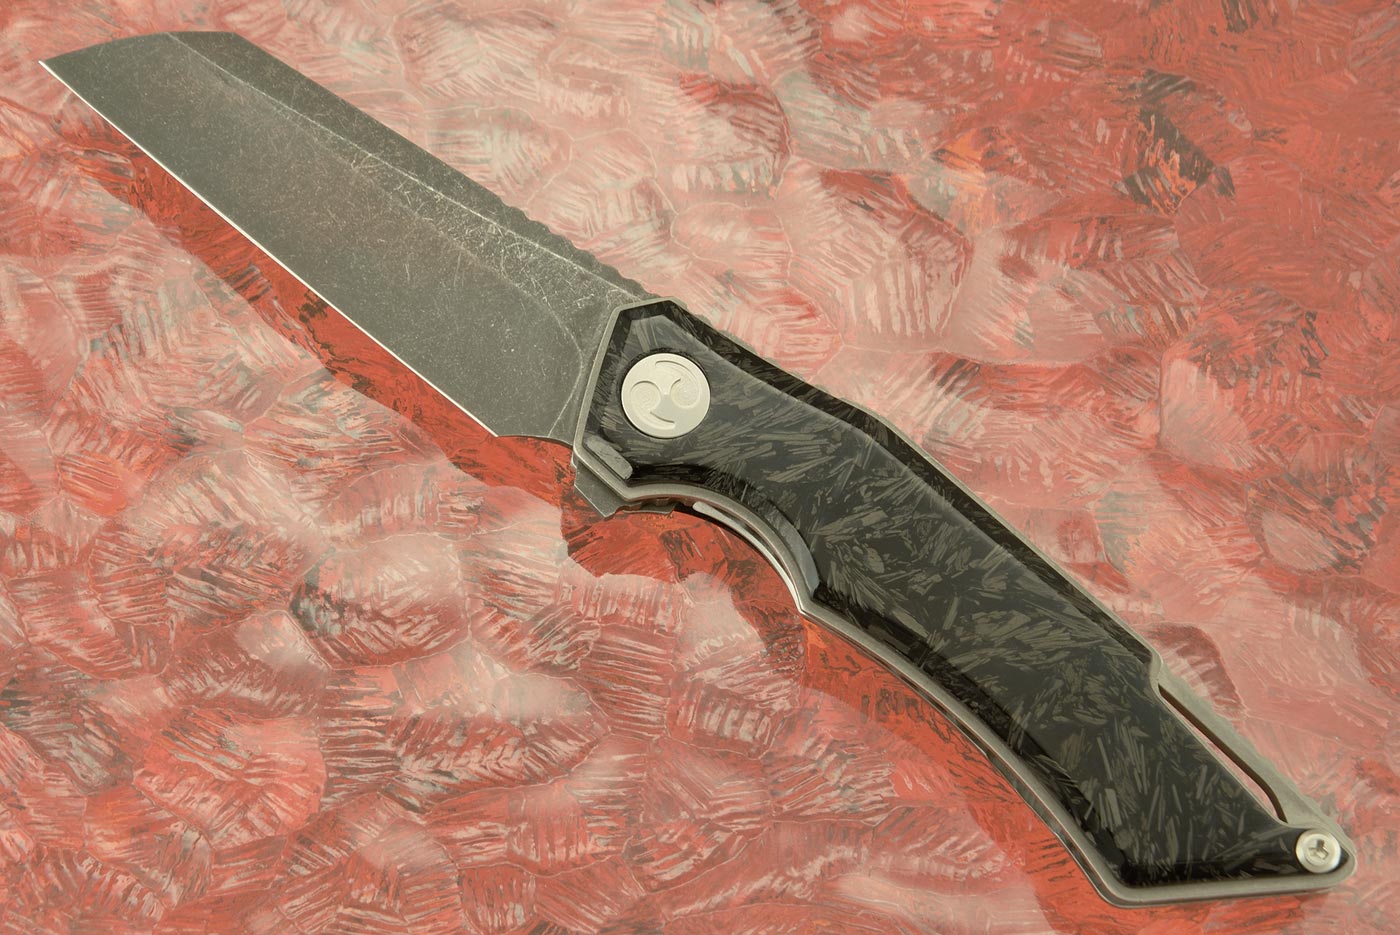 Ray Flipper with Shred Carbon Fiber